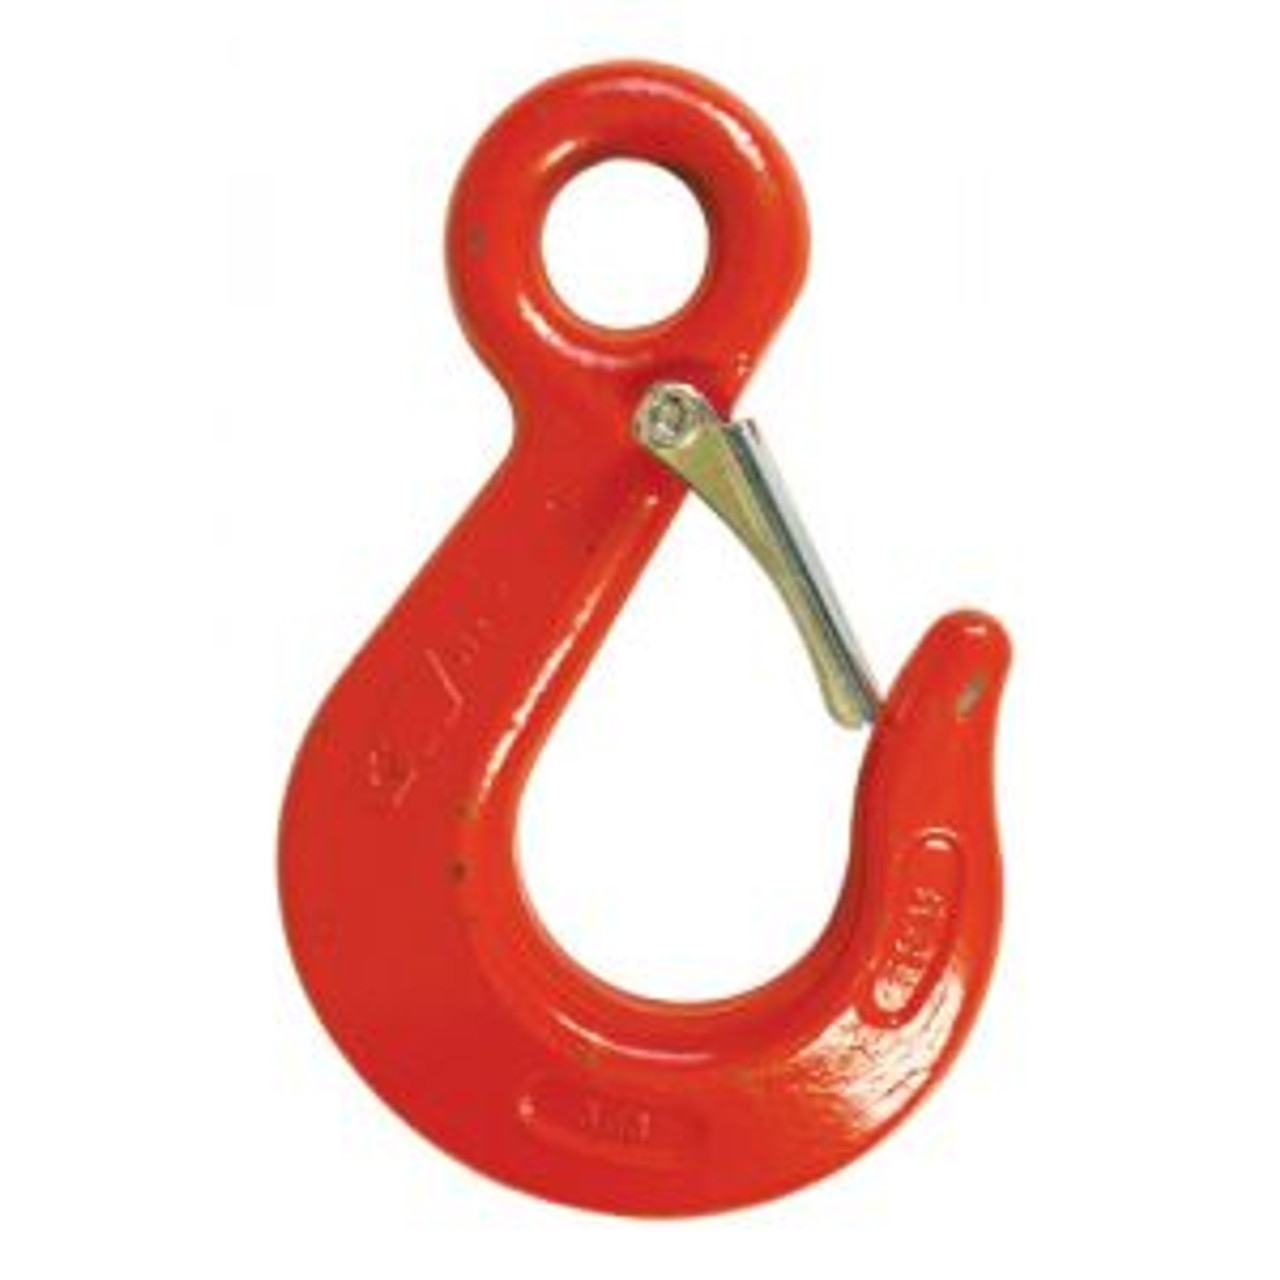 15 Ton Alloy Eye Hoist Hook With Latch, Made In USA.